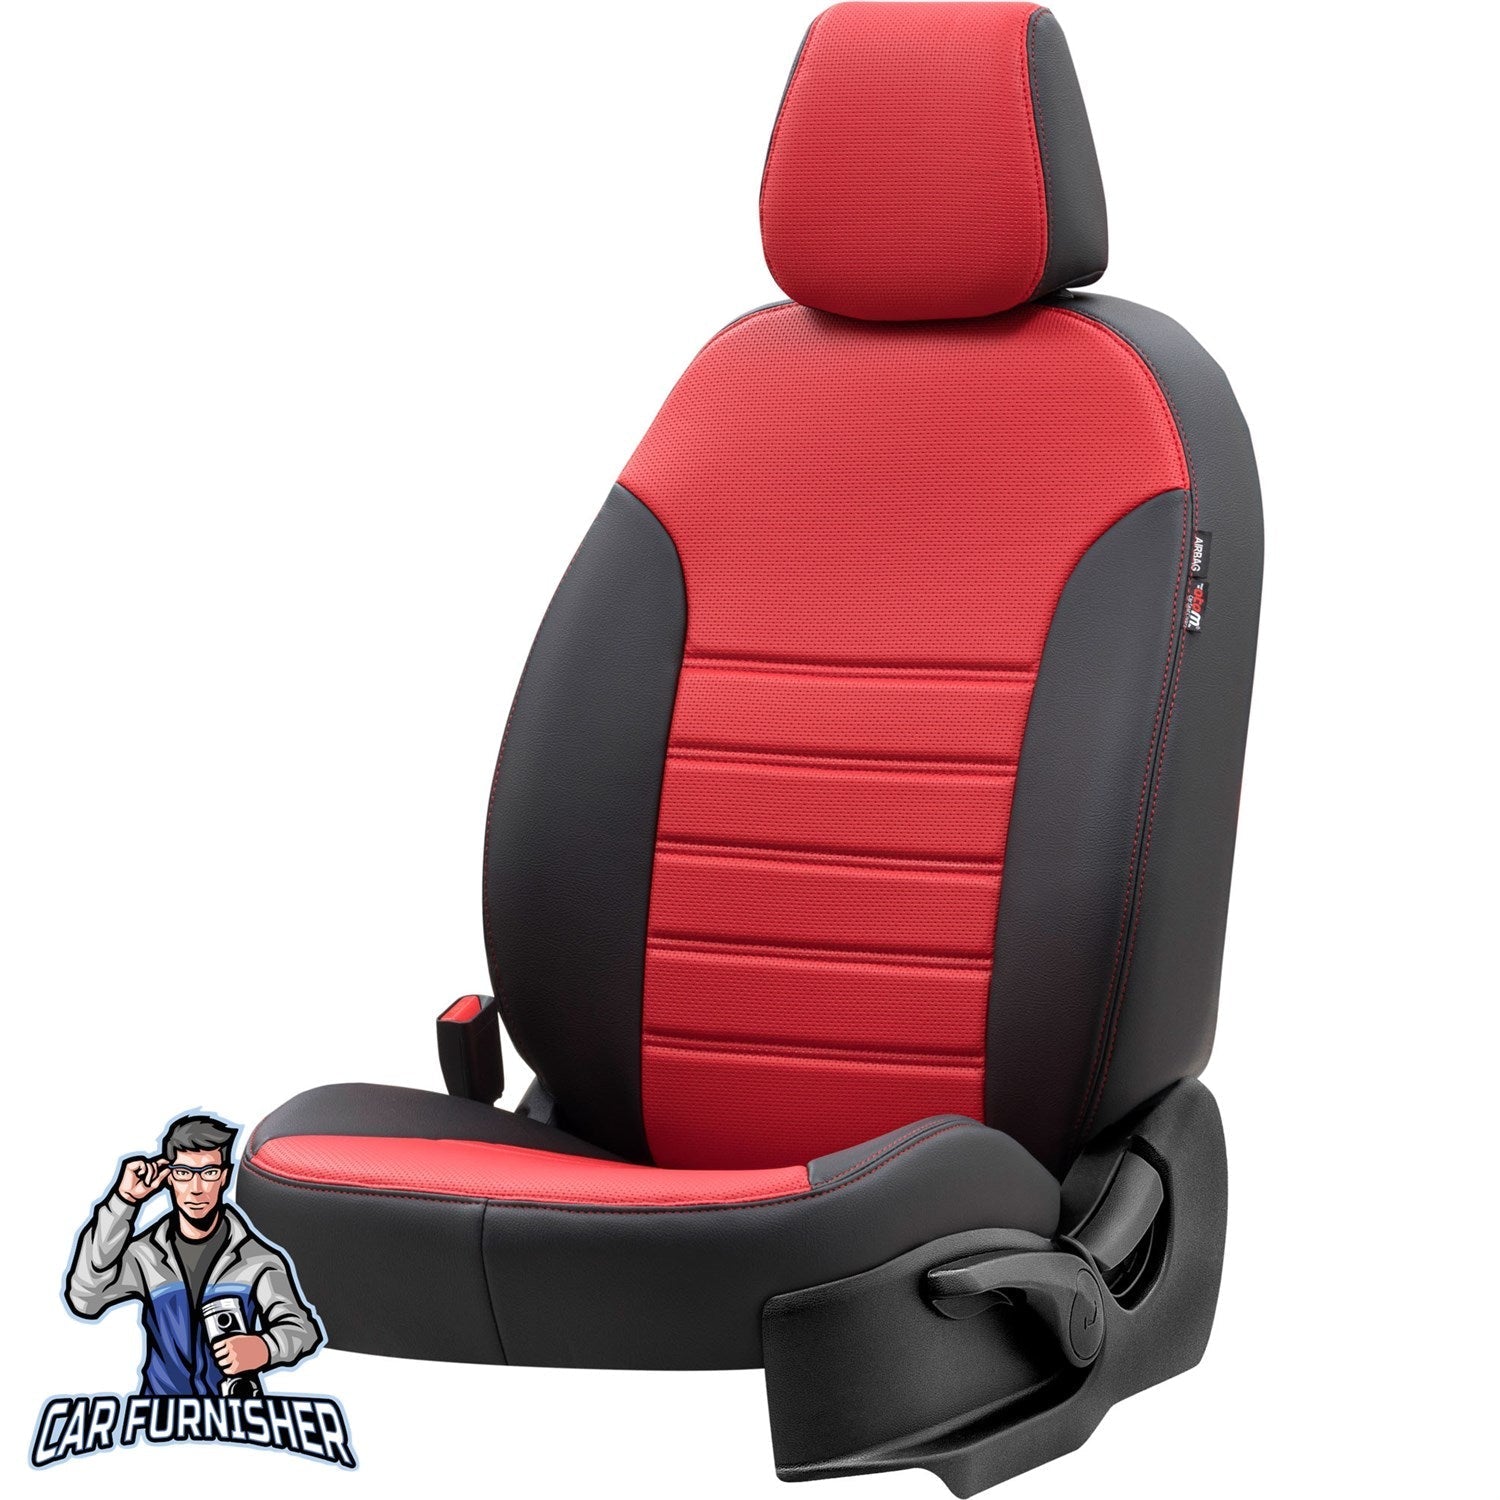 Isuzu L35 Seat Cover New York Leather Design Red Leather